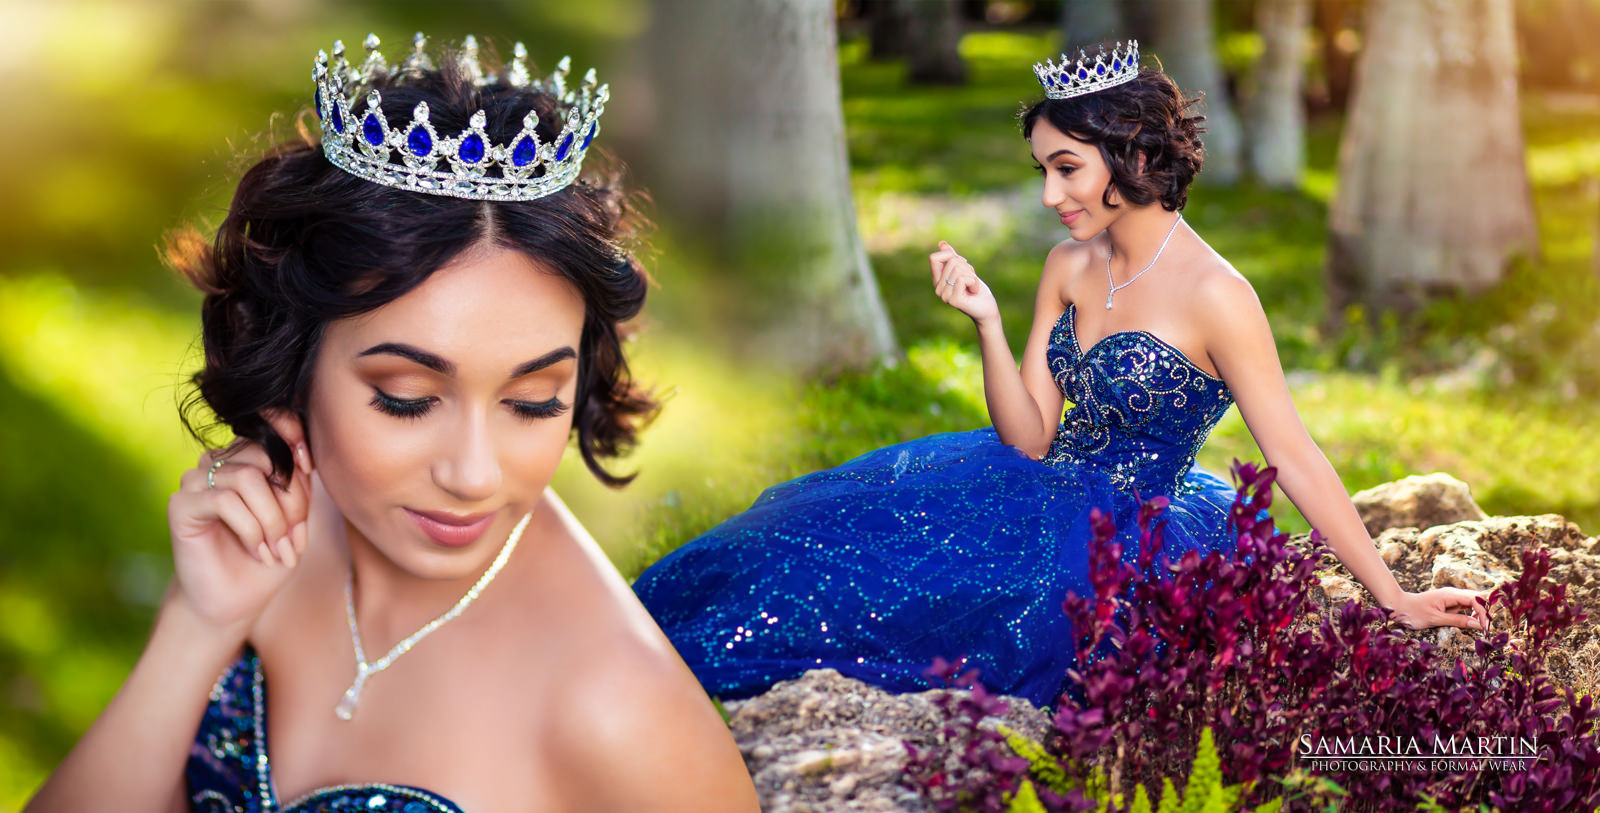 Fashion photoshoot, best quinceanera pictures in Miami, Samaria Martin Photographer, where to rent quinceanera dresses, quinceanera collection 1